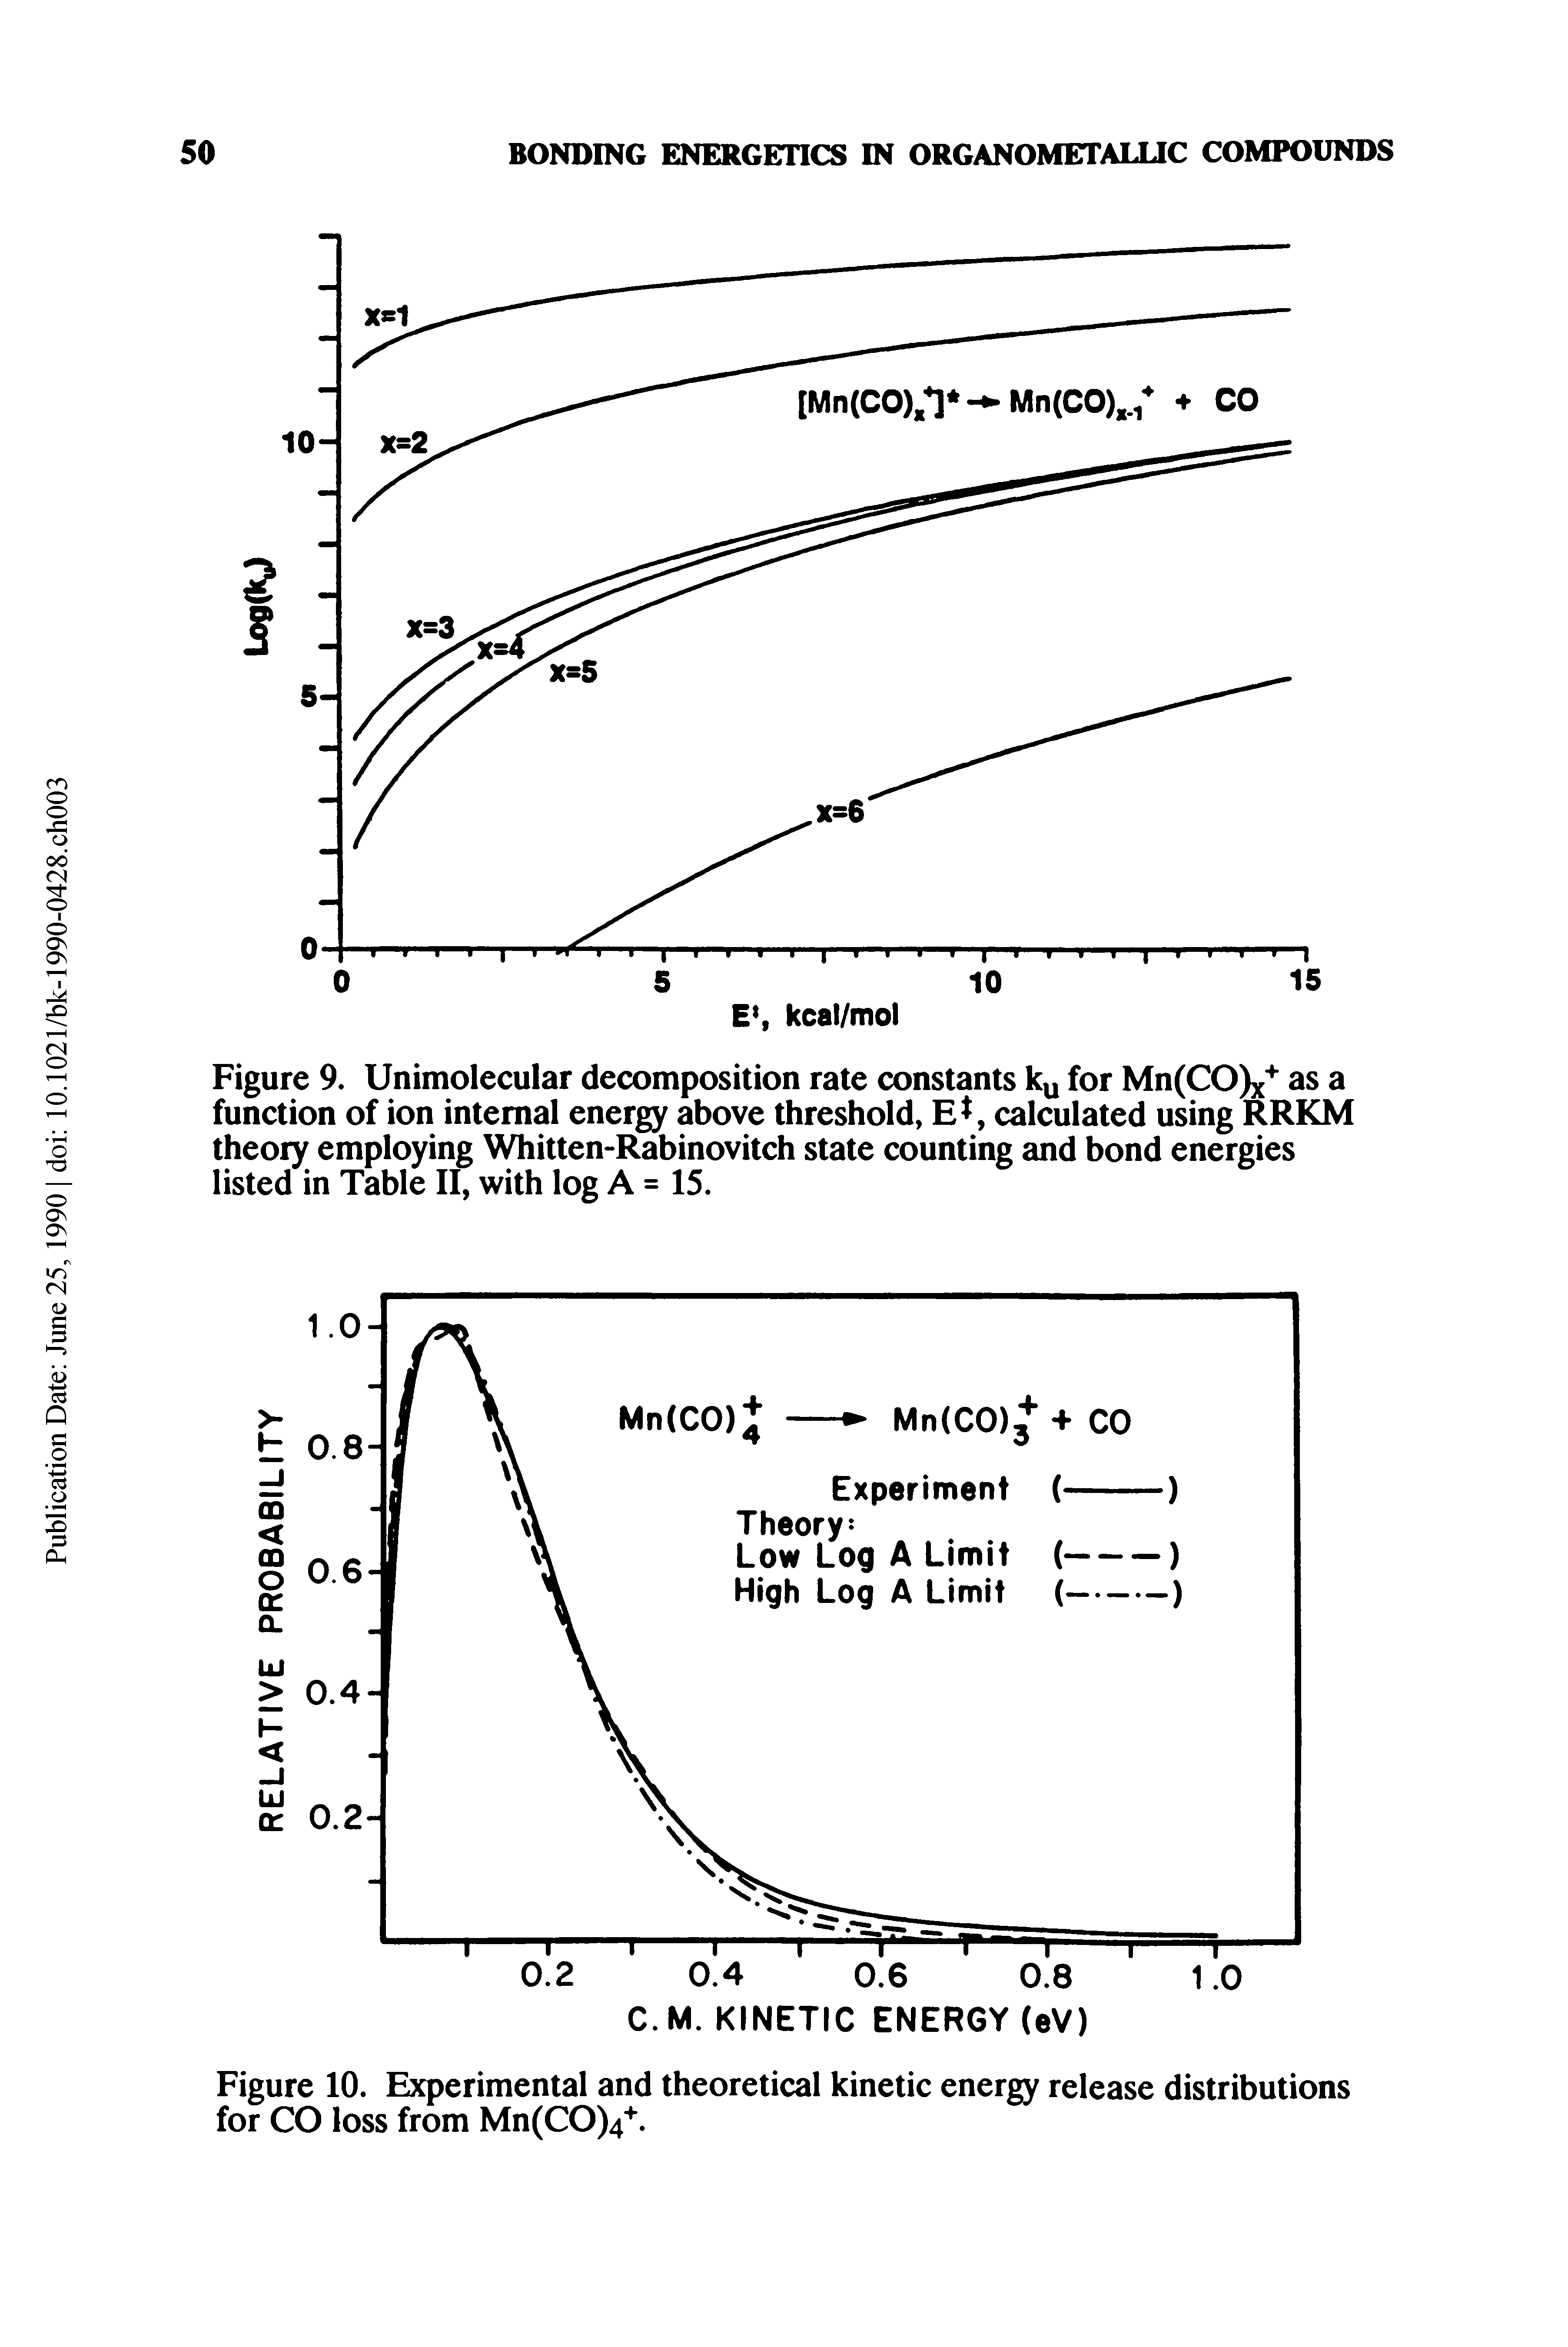 Figure 9. Unimolecular decomposition rate constants ky for Mn(CO)x as a function of ion internal energy above threshold, Ef, calculated using RRKM theory employing Whitten-Rabinovitch state counting and bond energies listed in Table II, with log A = 15.